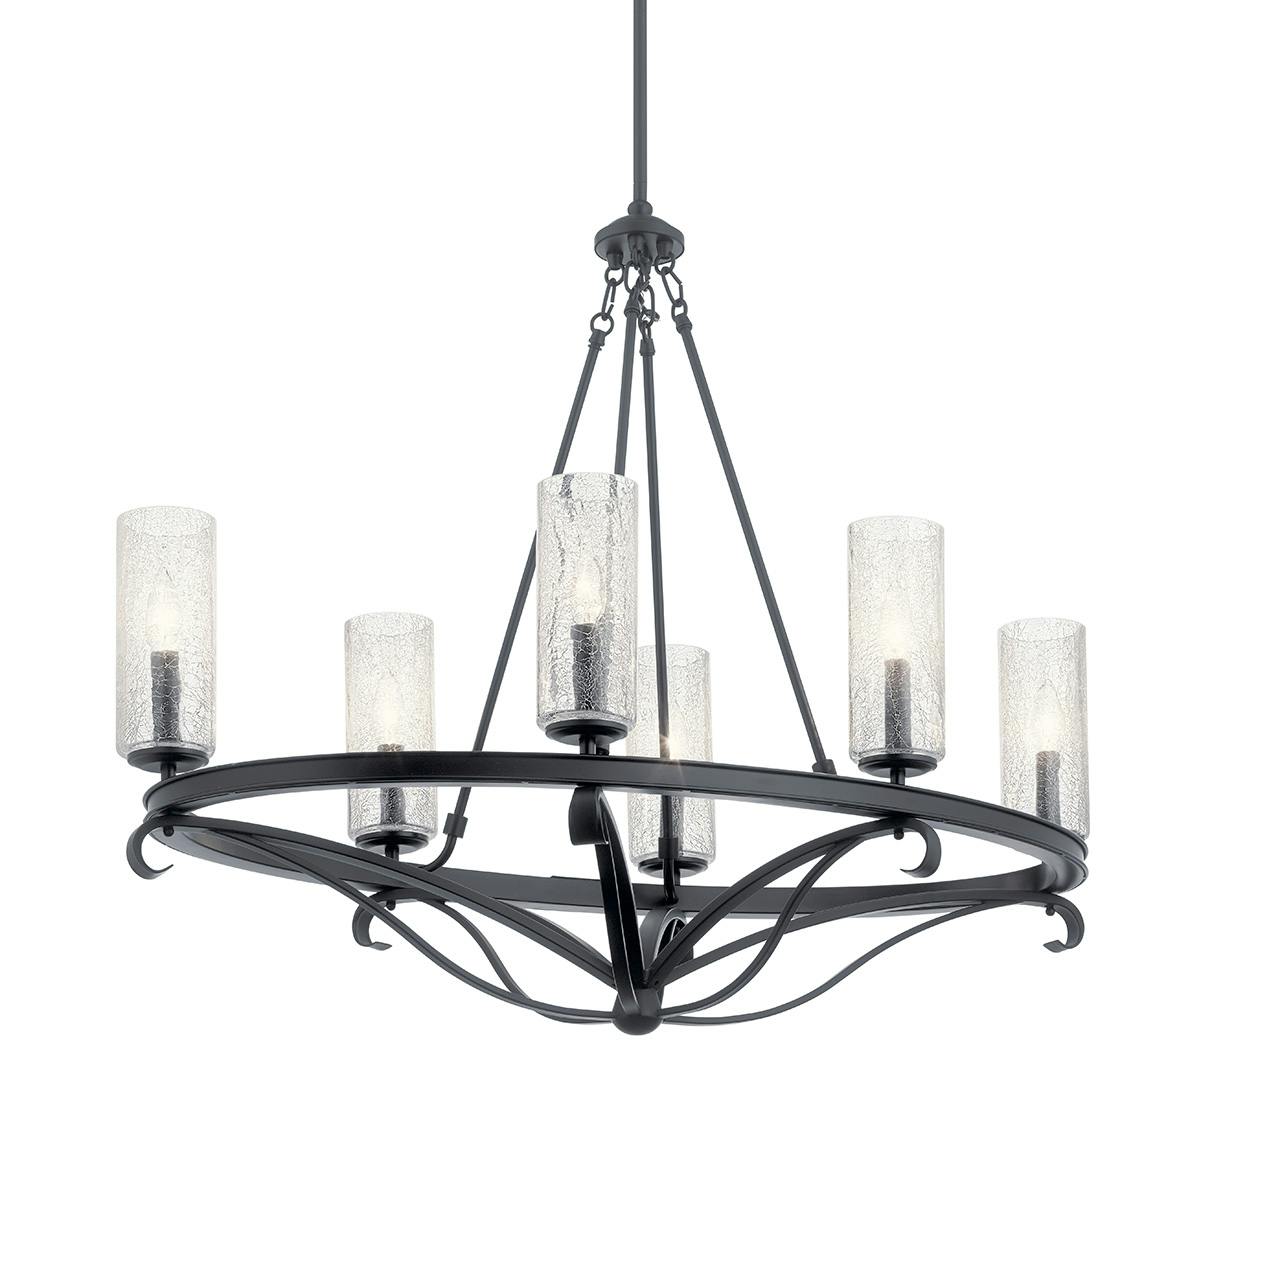 Krysia™ 6 Light Oval Chandelier Black without the canopy on a white background